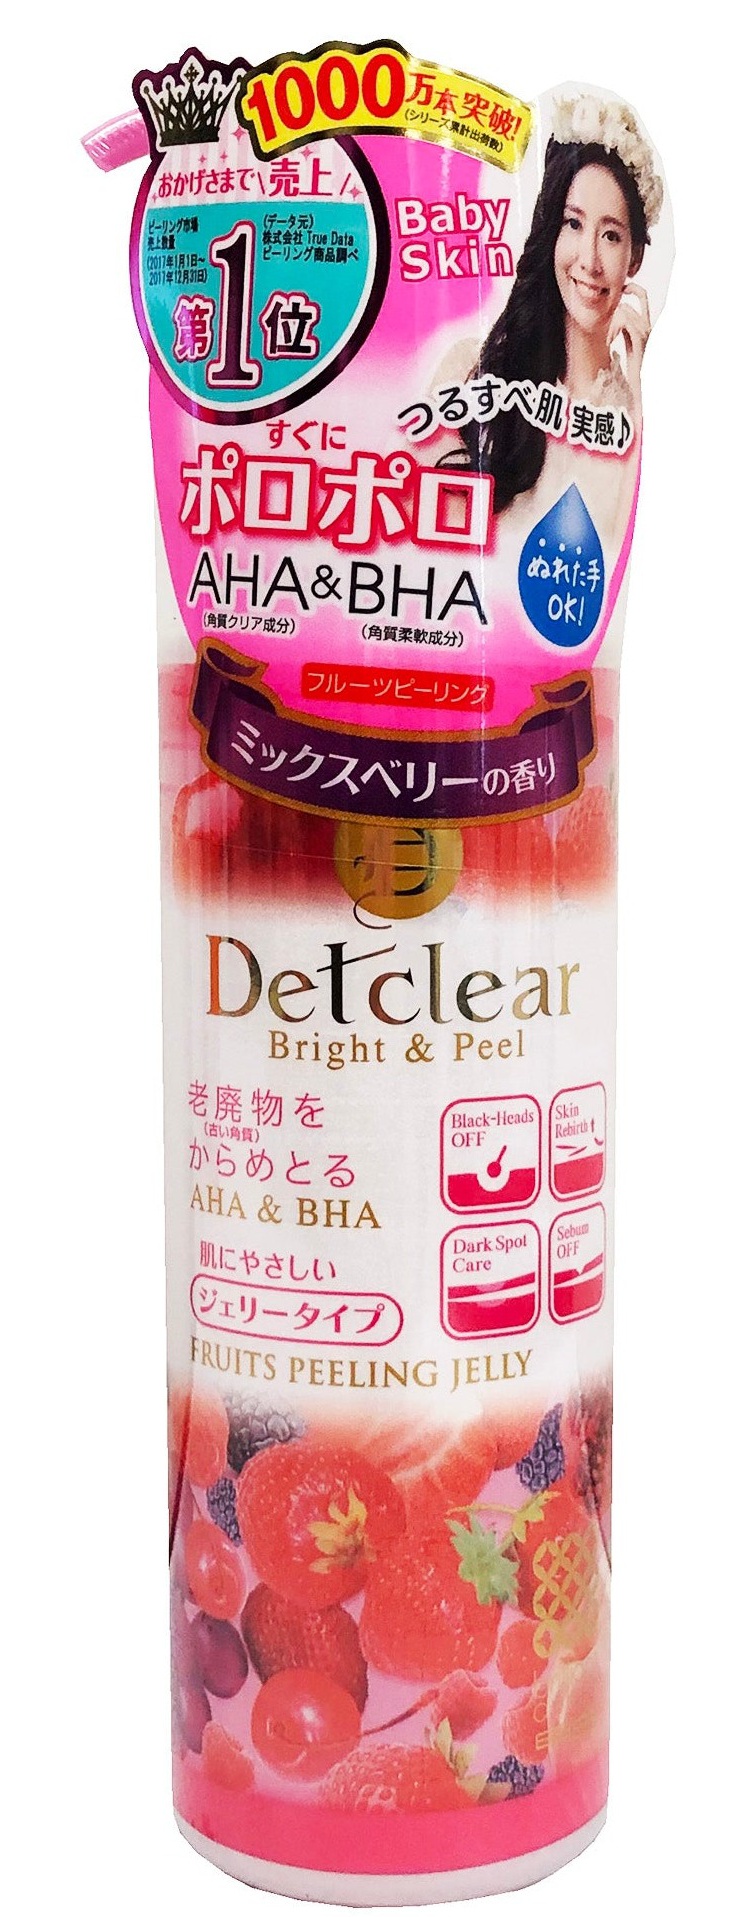 Detclear Fruits Peeling Jelly Mixed Berry